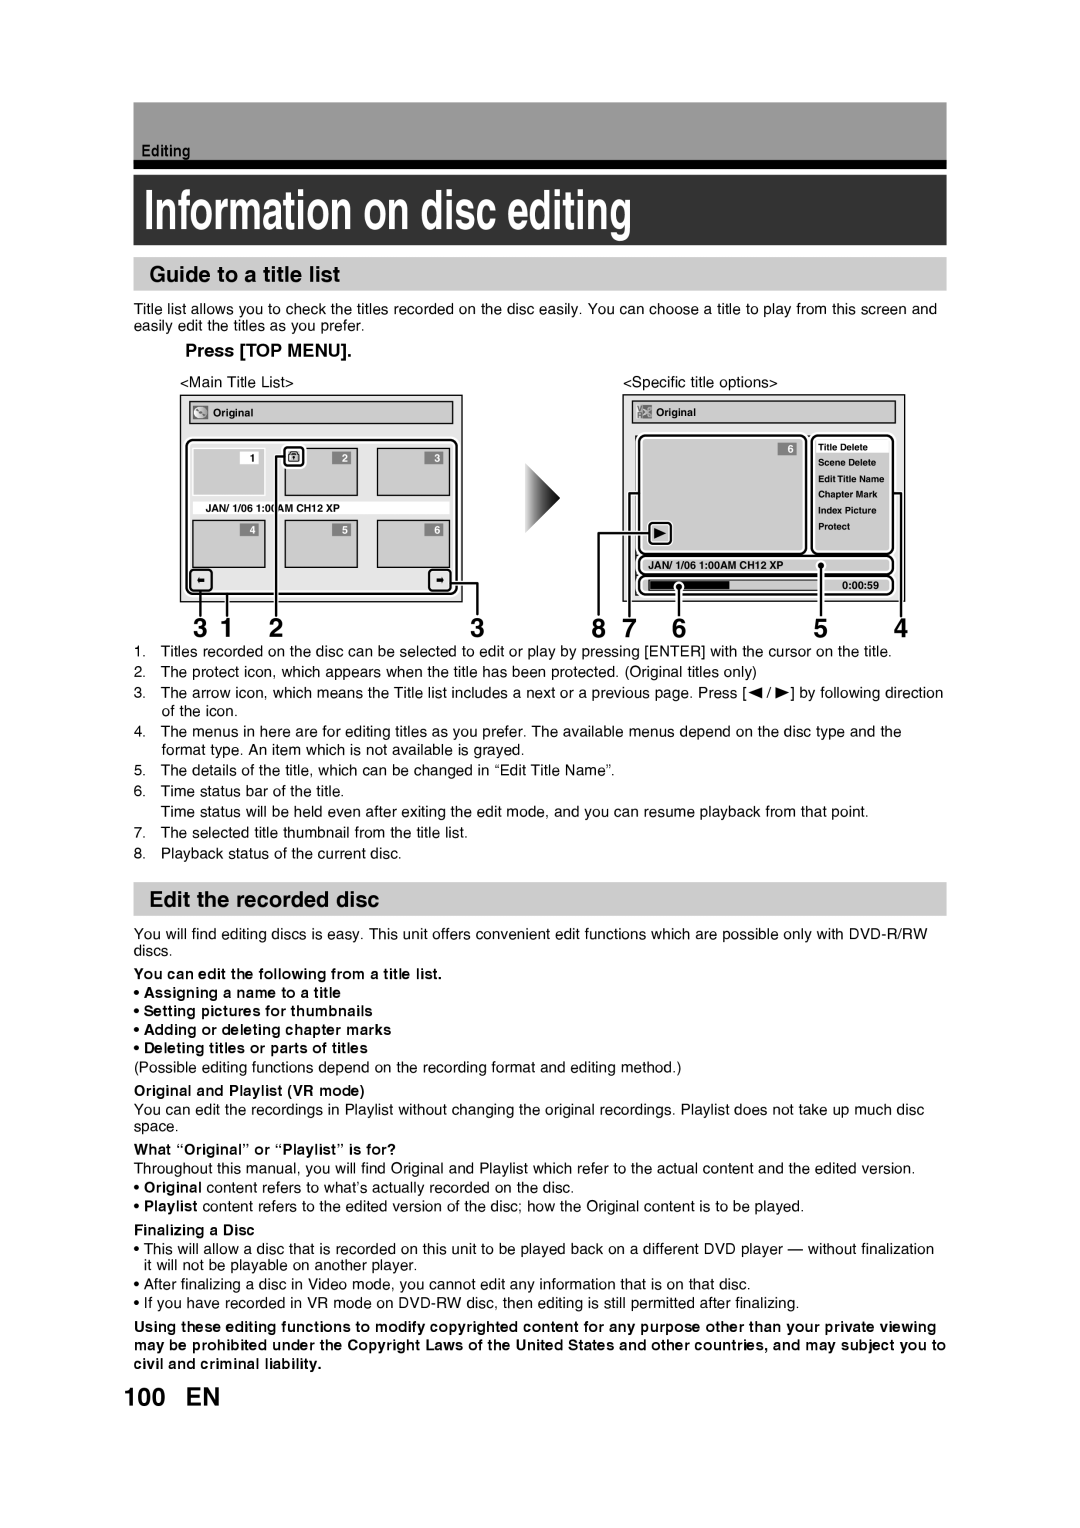 Toshiba D-RW2SU/D-RW2SC Information on disc editing, 100 EN, Guide to a title list, Edit the recorded disc, Press TOP MENU 